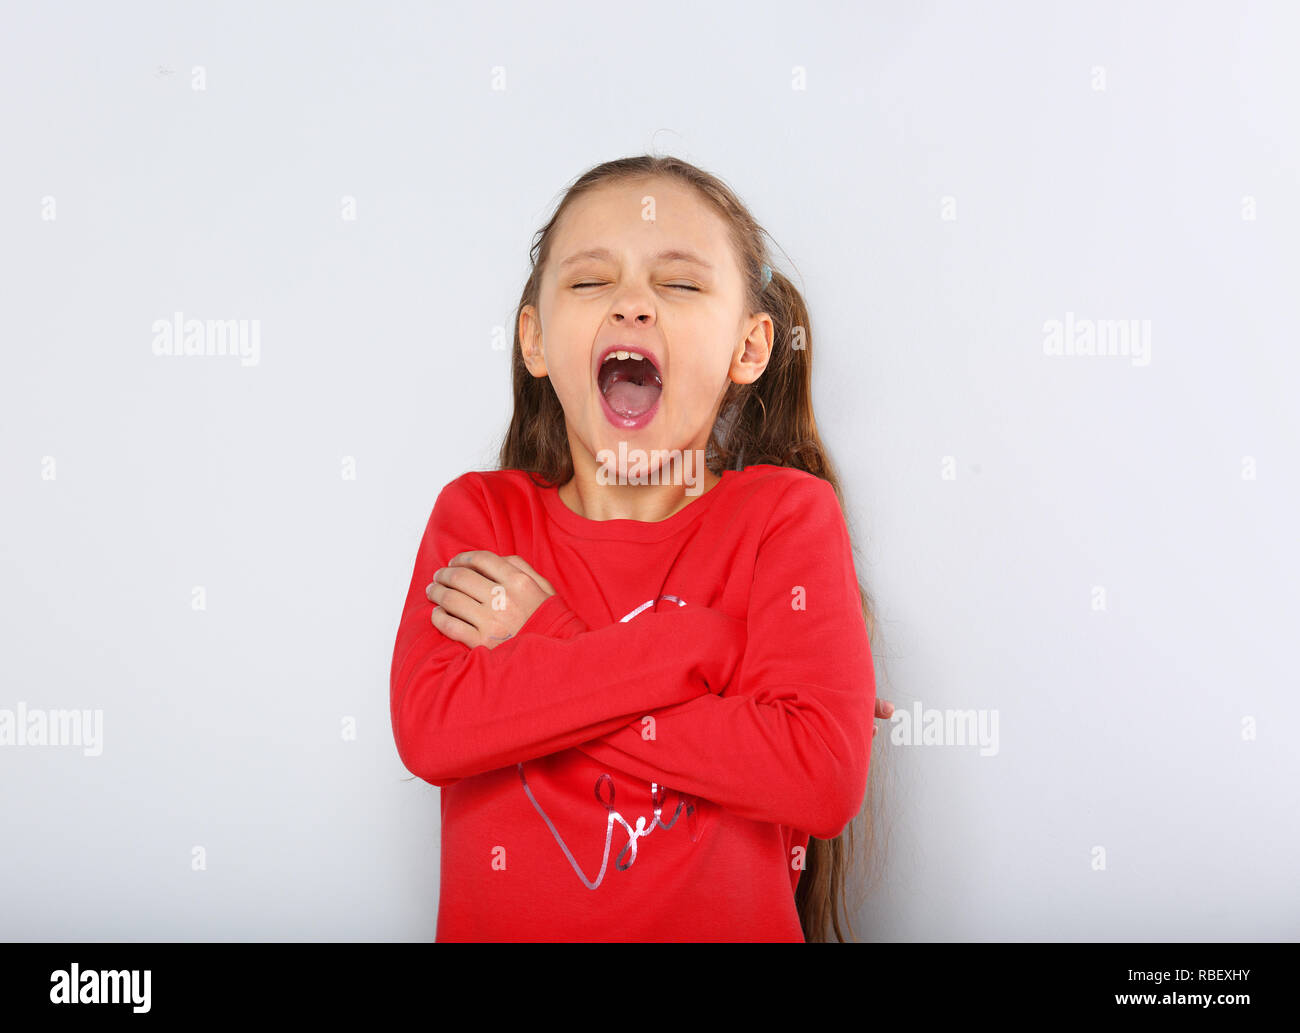 Kid girl strong screaming with open mouth and folded arms on blue background with empty copy space Stock Photo